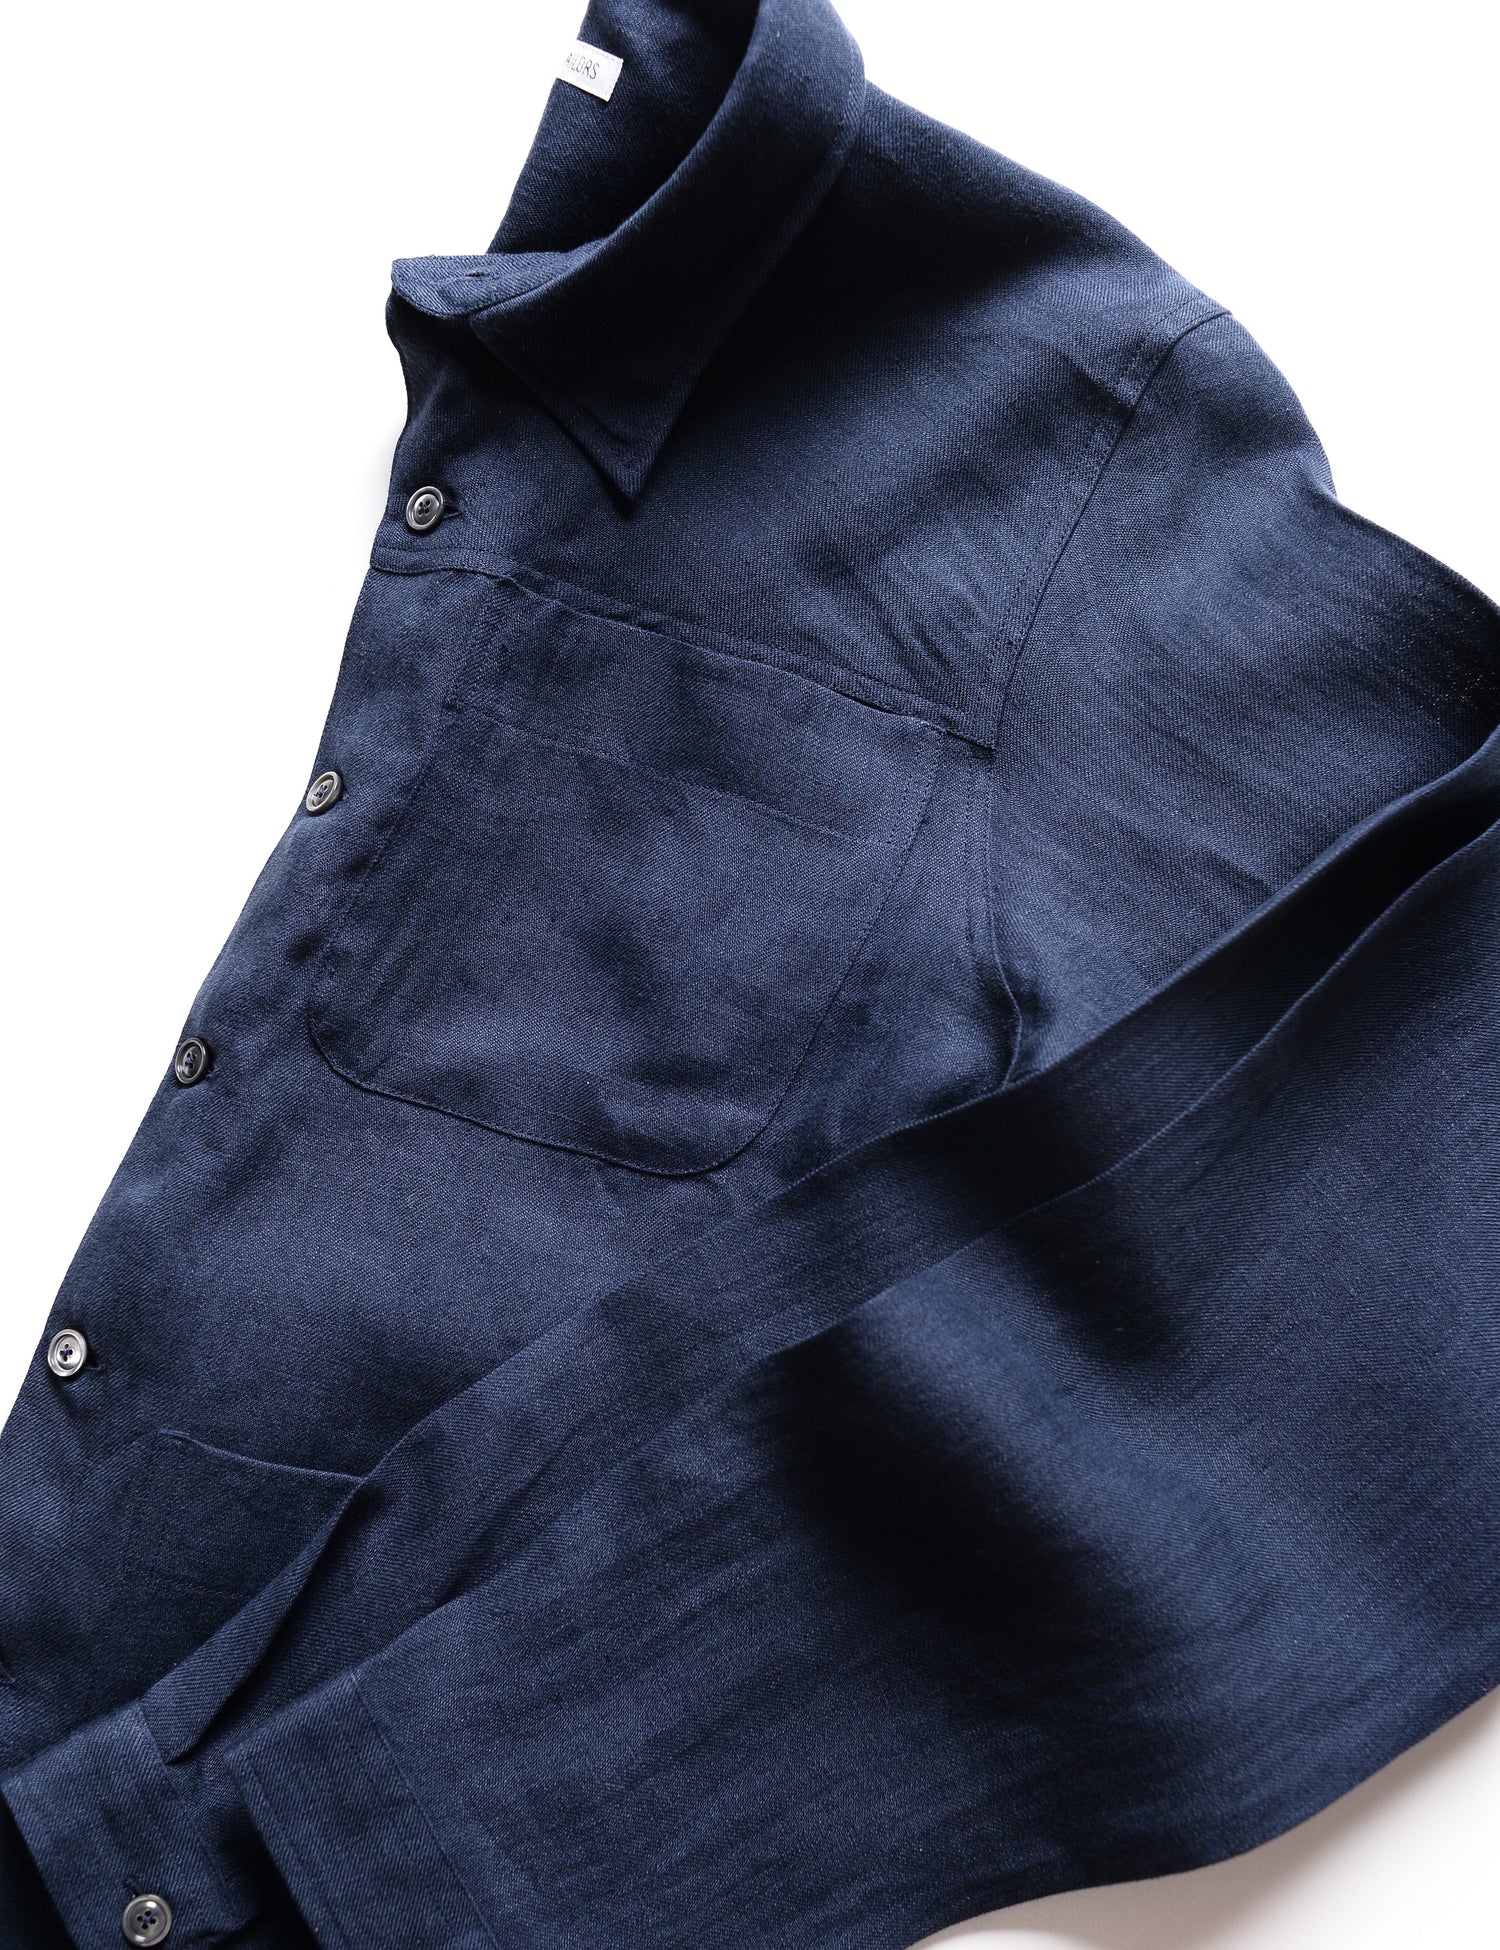 Detail of sleeve and buttons of Brooklyn Tailors BKT15 Shirt Jacket in Linen Twill - Salerno Blue